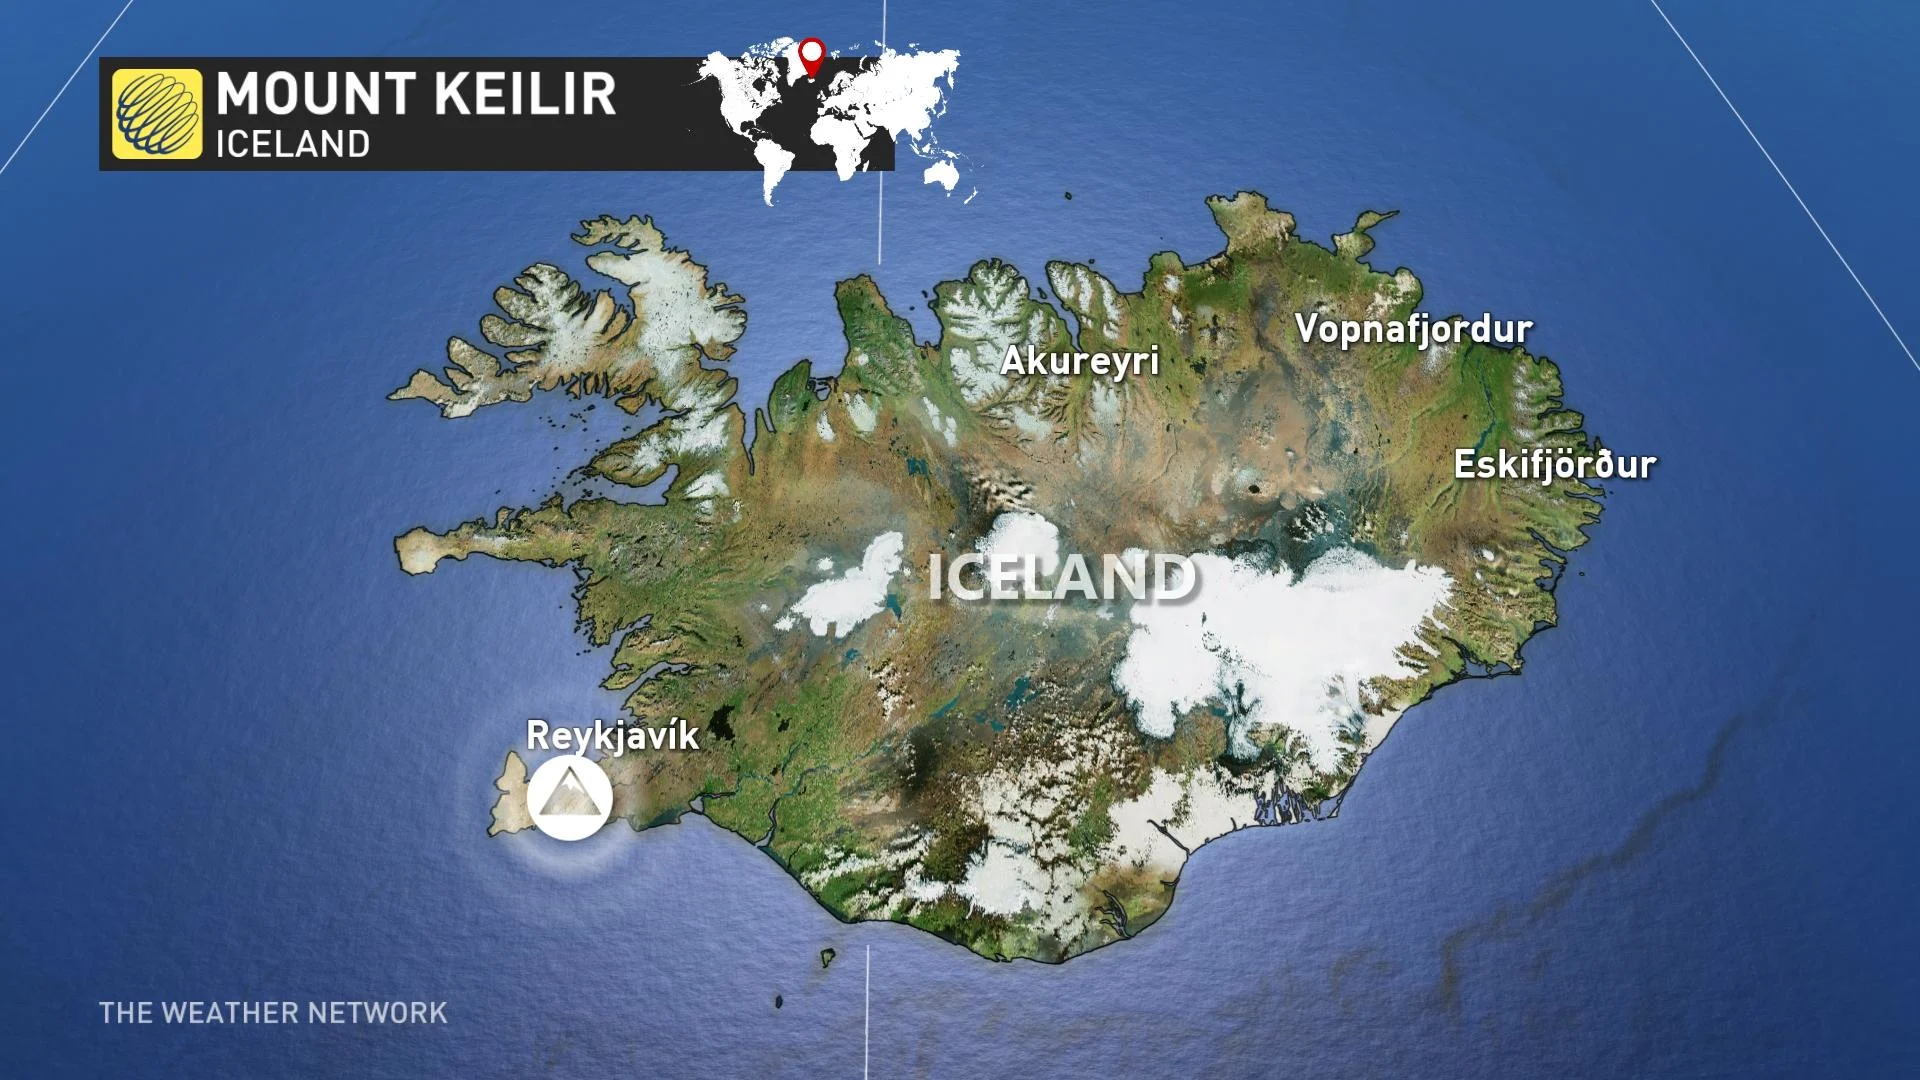 Iceland volcano that's been dormant for 800 years could soon erupt